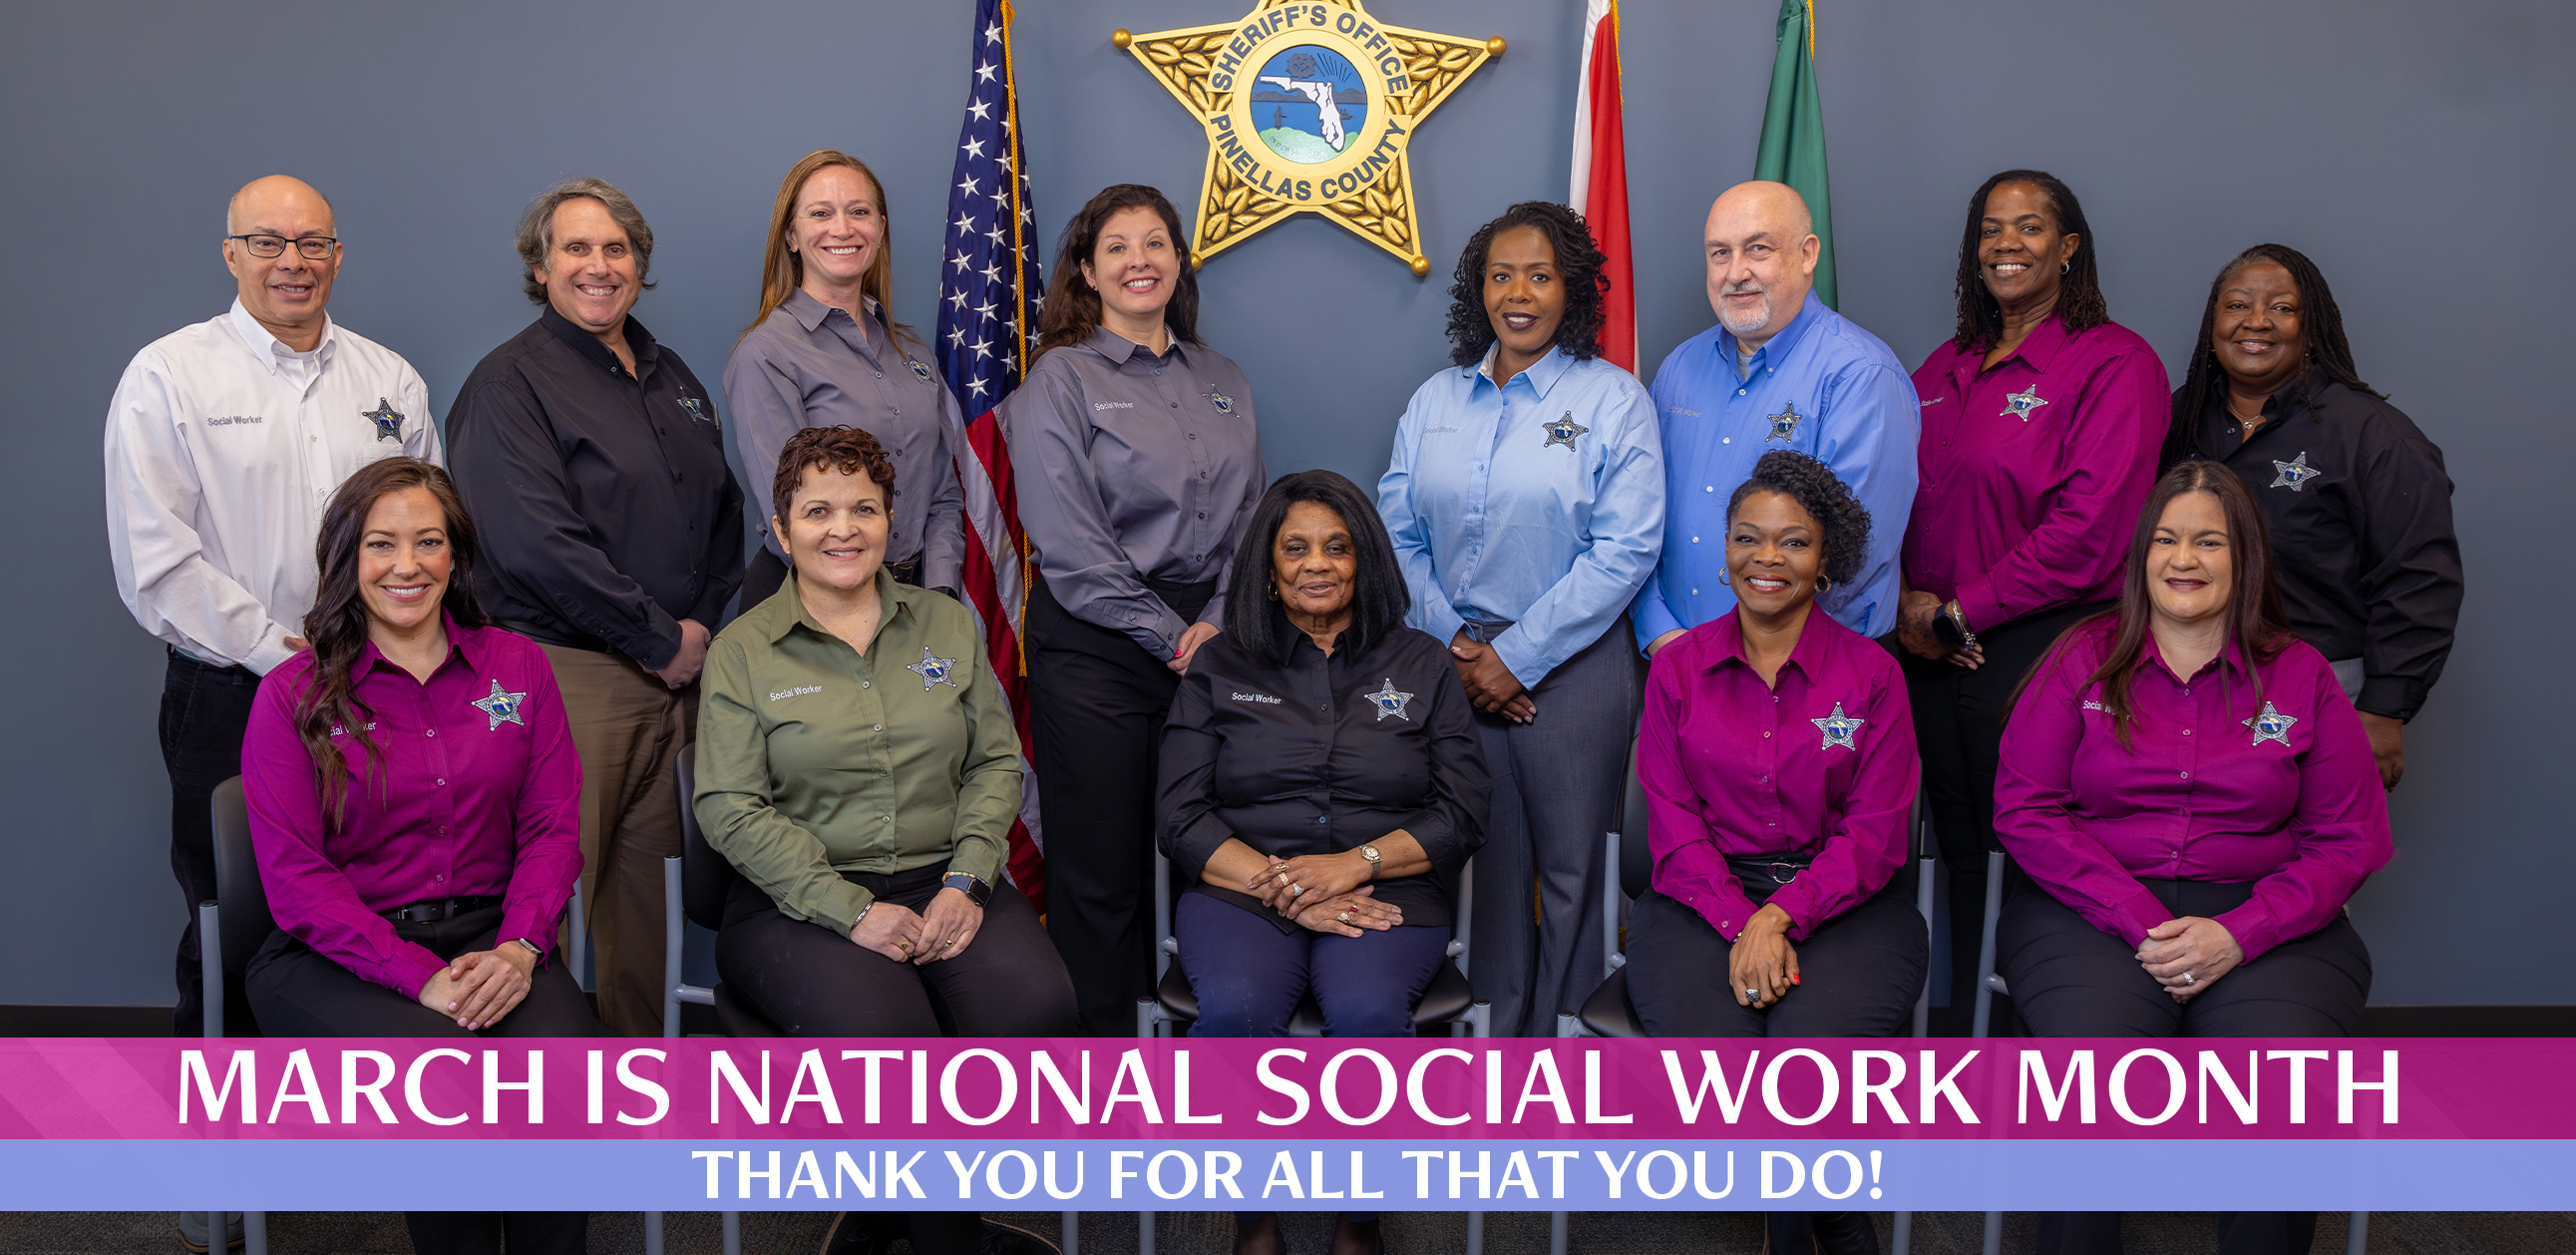 March is National Social Work Month, Thank you for all you do!